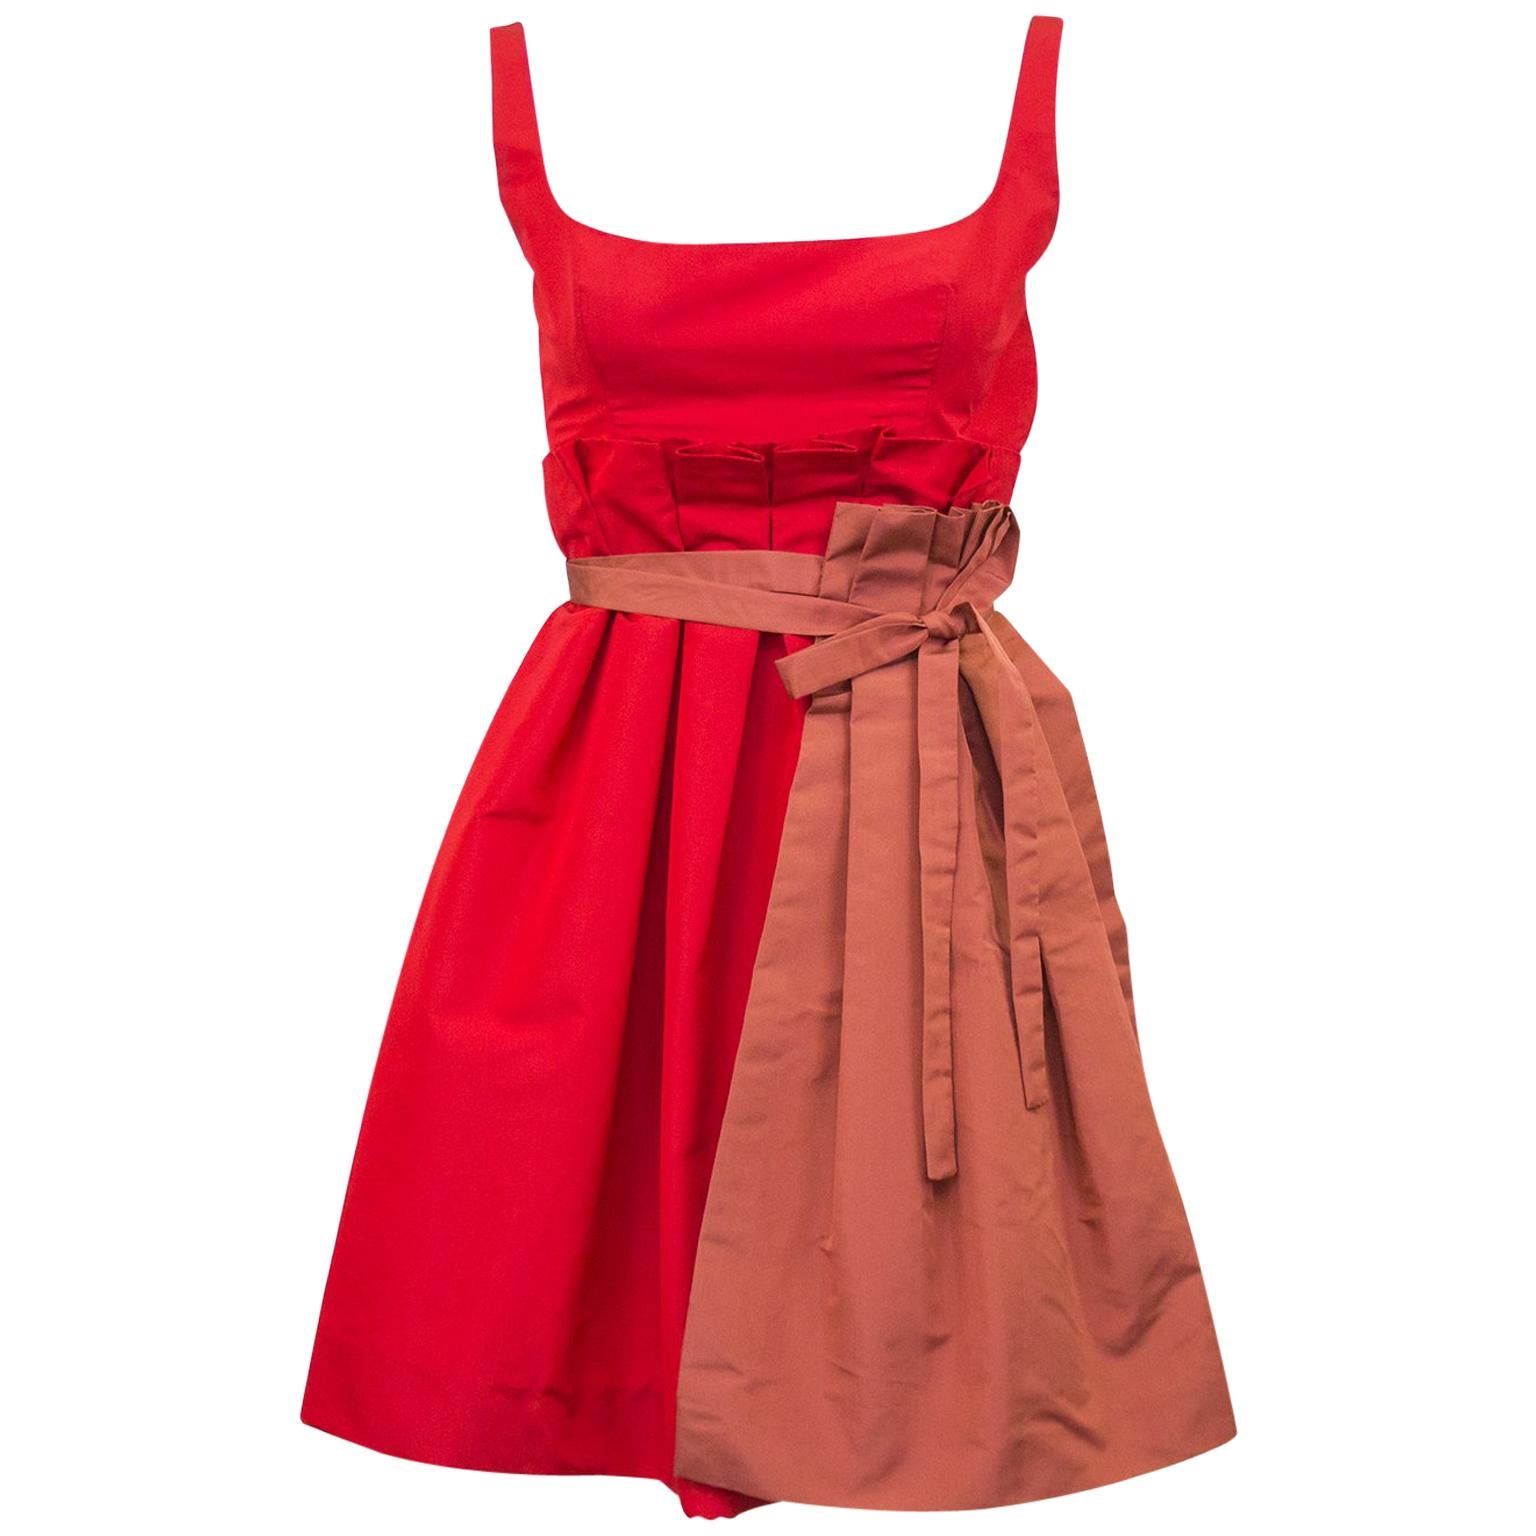 2005 Prada Spring Ready-to-Wear Red Taffeta Cocktail Dress With Apron For Sale